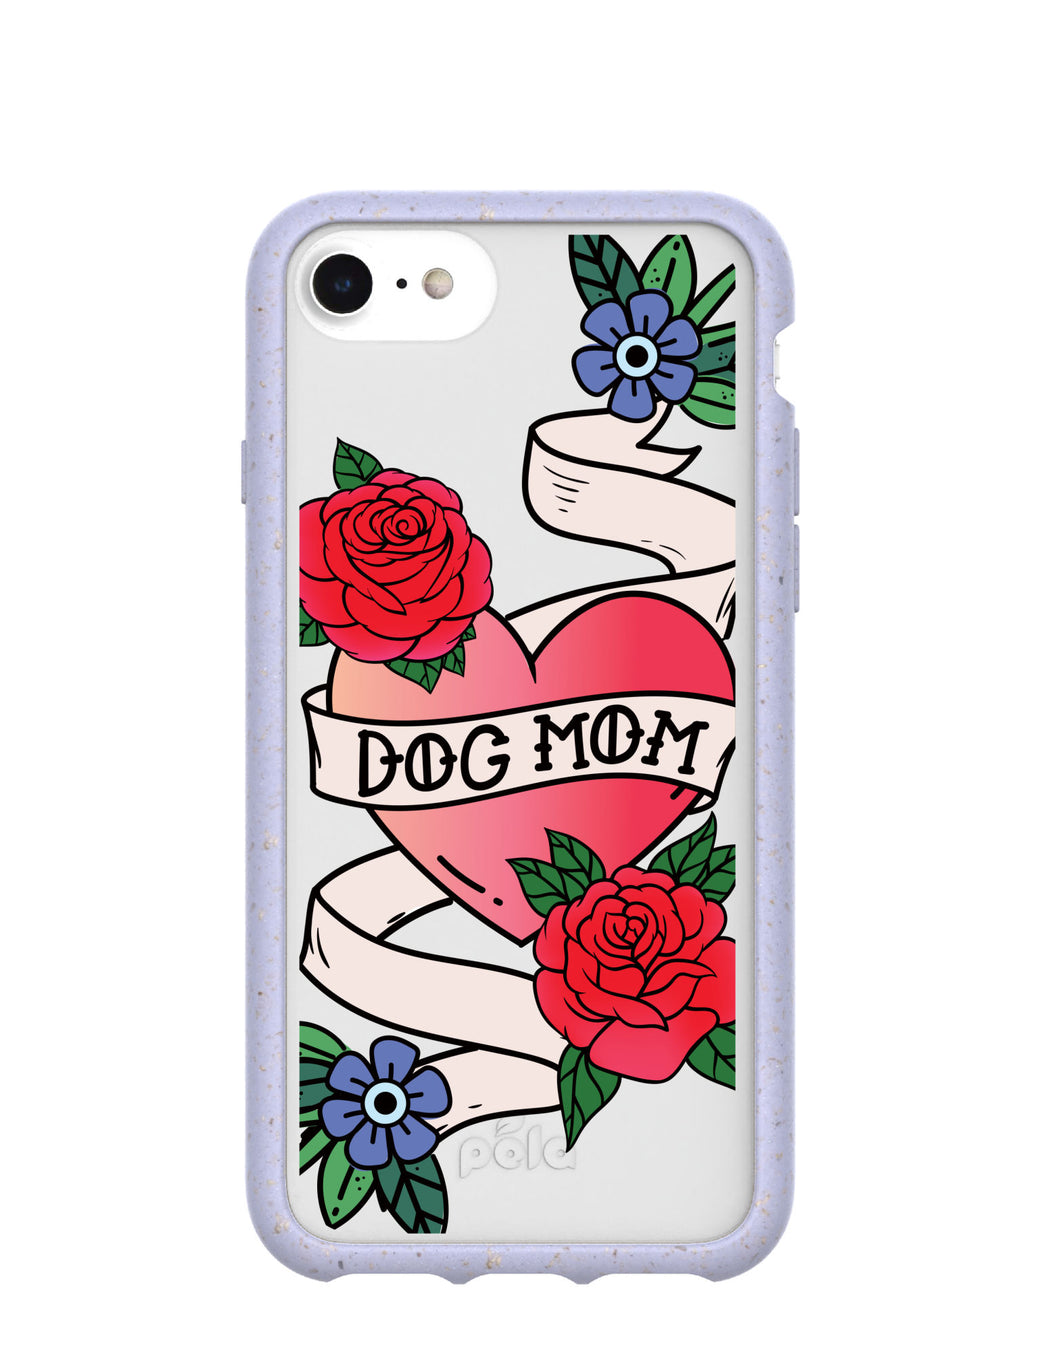 Clear Dog Mom iPhone 6/6s/7/8/SE Case With Lavender Ridge